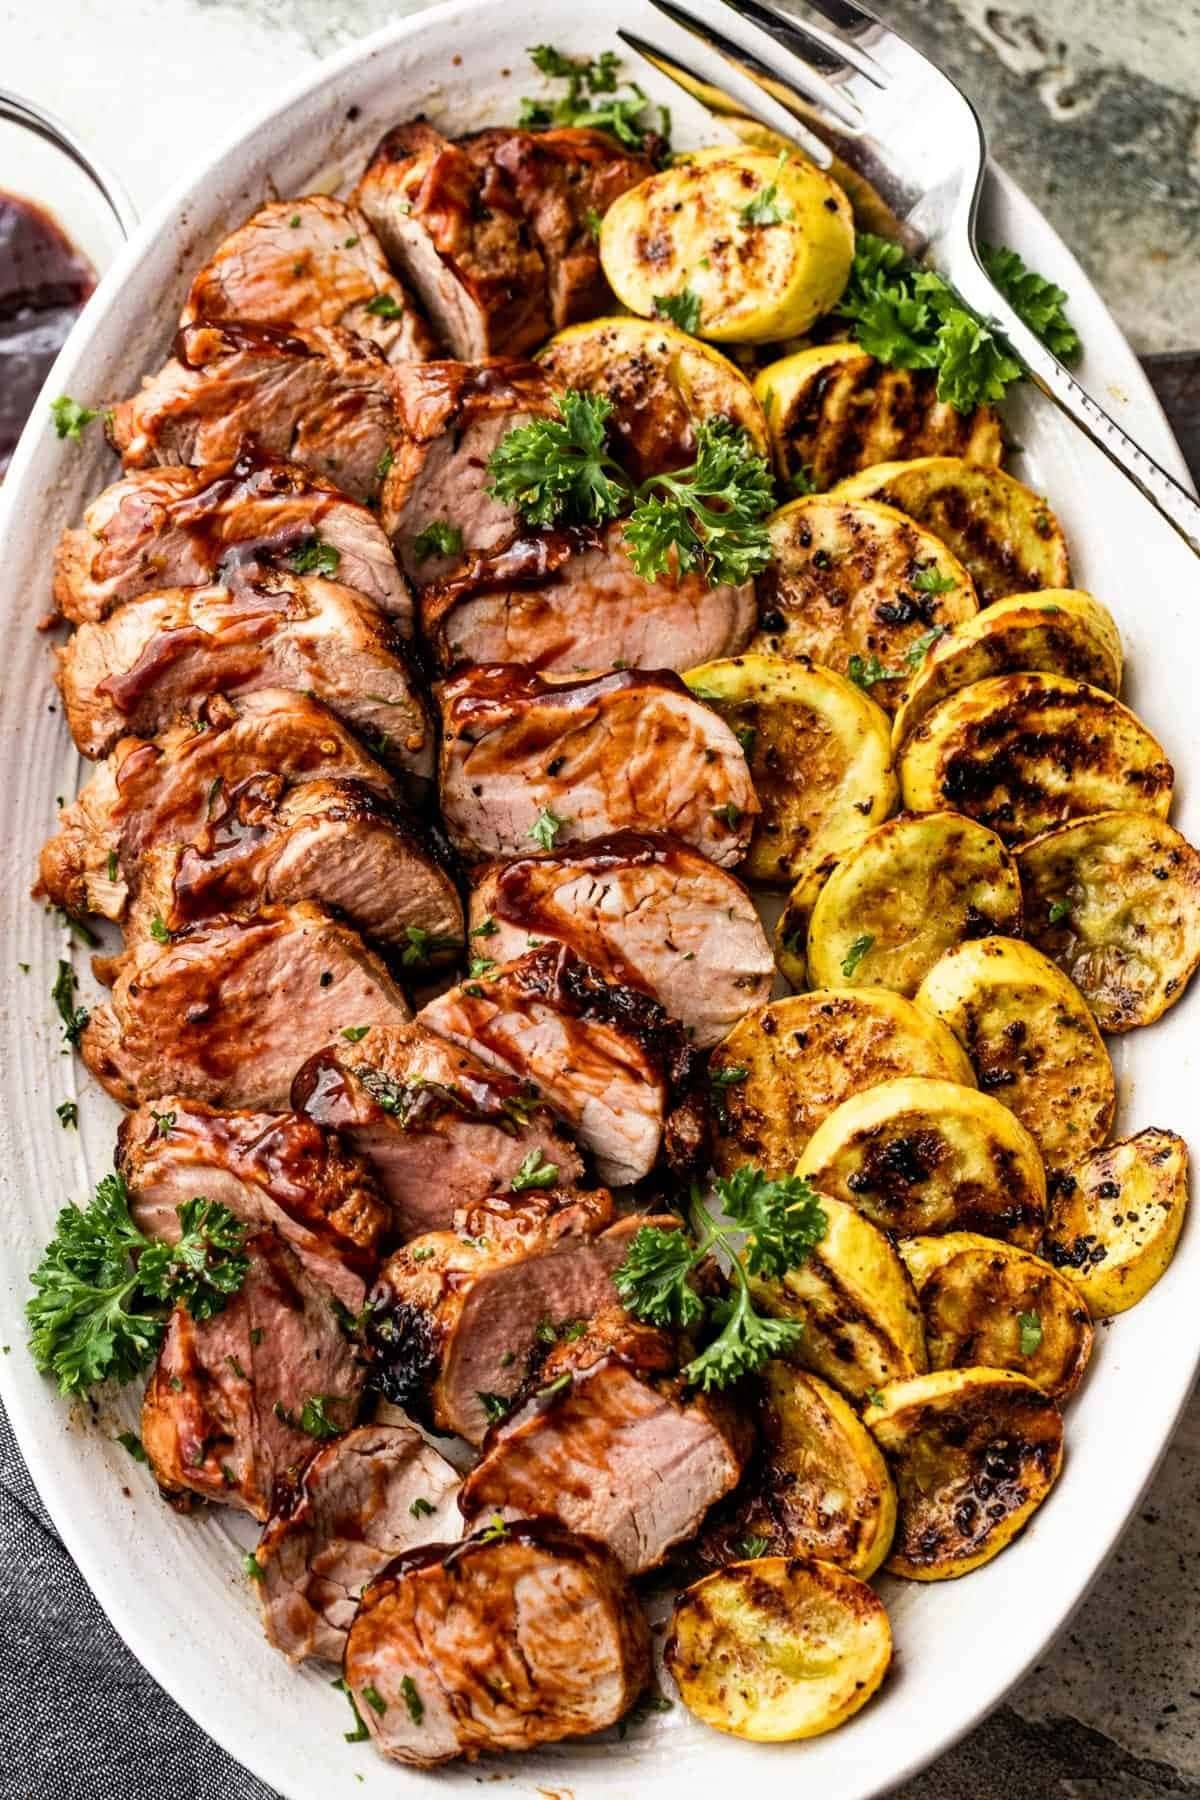 Sliced grilled pork tenderloin served with roasted sliced potatoes garnished with parsley leaves.